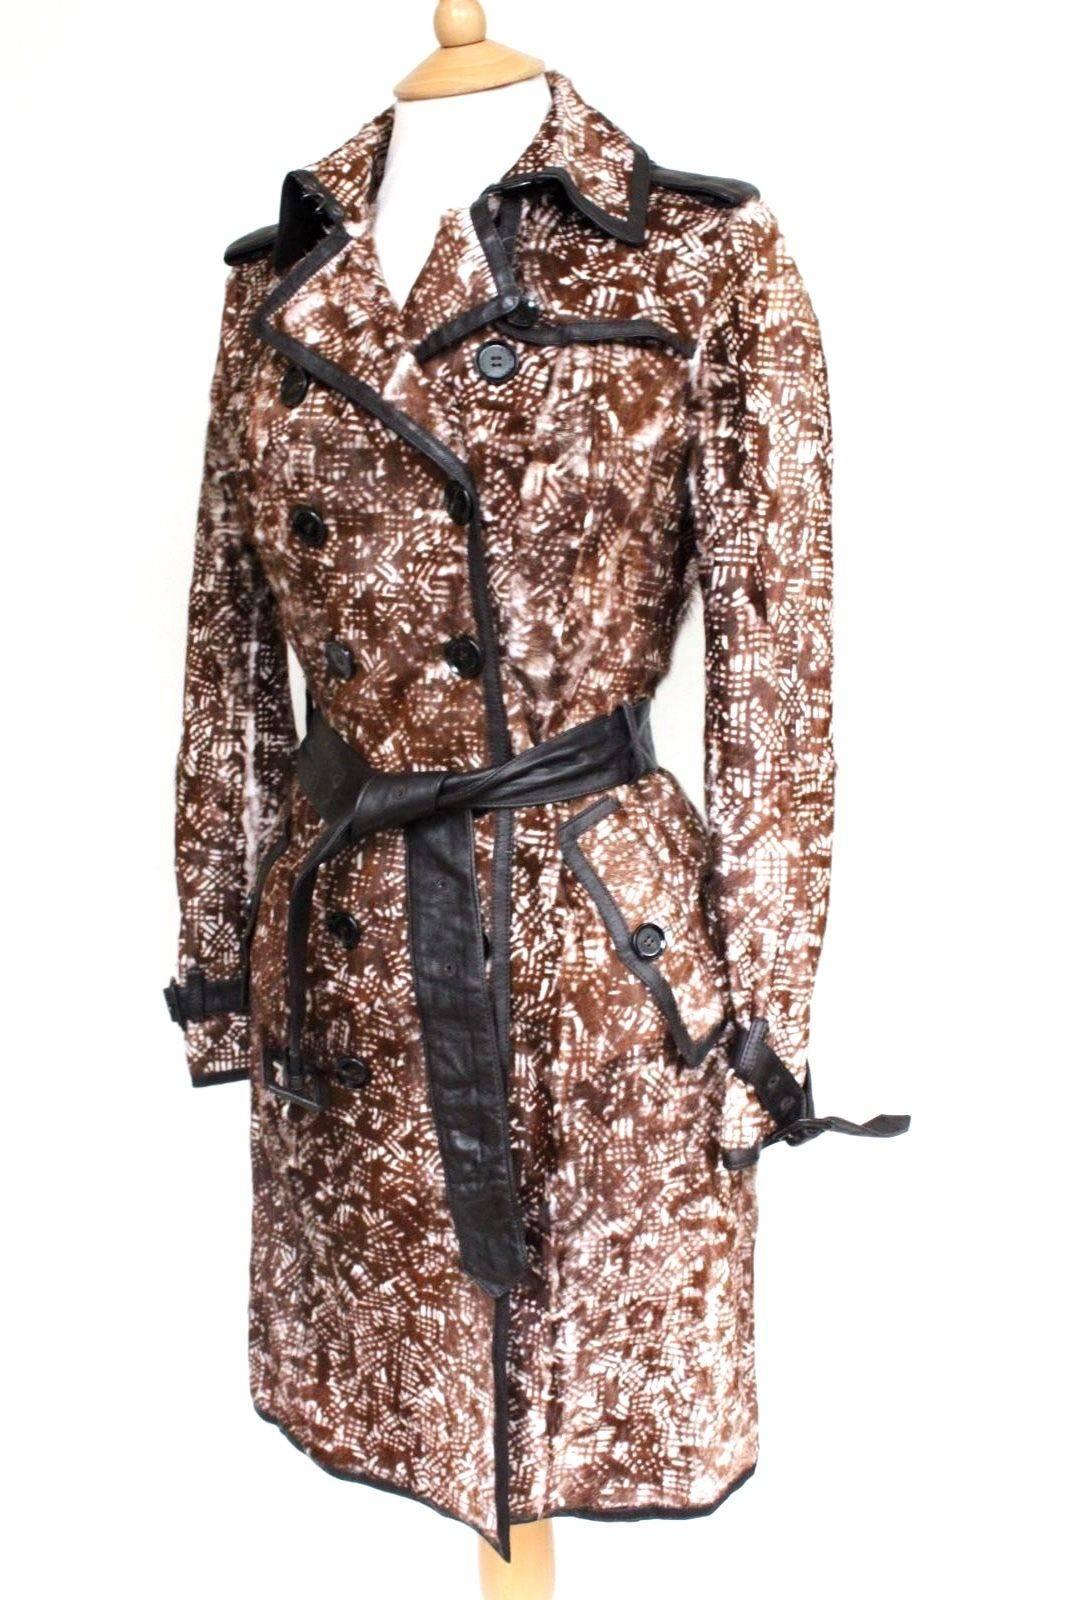 £2580 Burberry Brown Abstract Print Rabbit Fur Leather Trench Coat UK 8
Stunning fur coat from Burberry, featuring printed rabbit fur with contracting leather trim 
Double breasted botton closure, leather belt 
Length 37 inches, sleeve 23 inches,